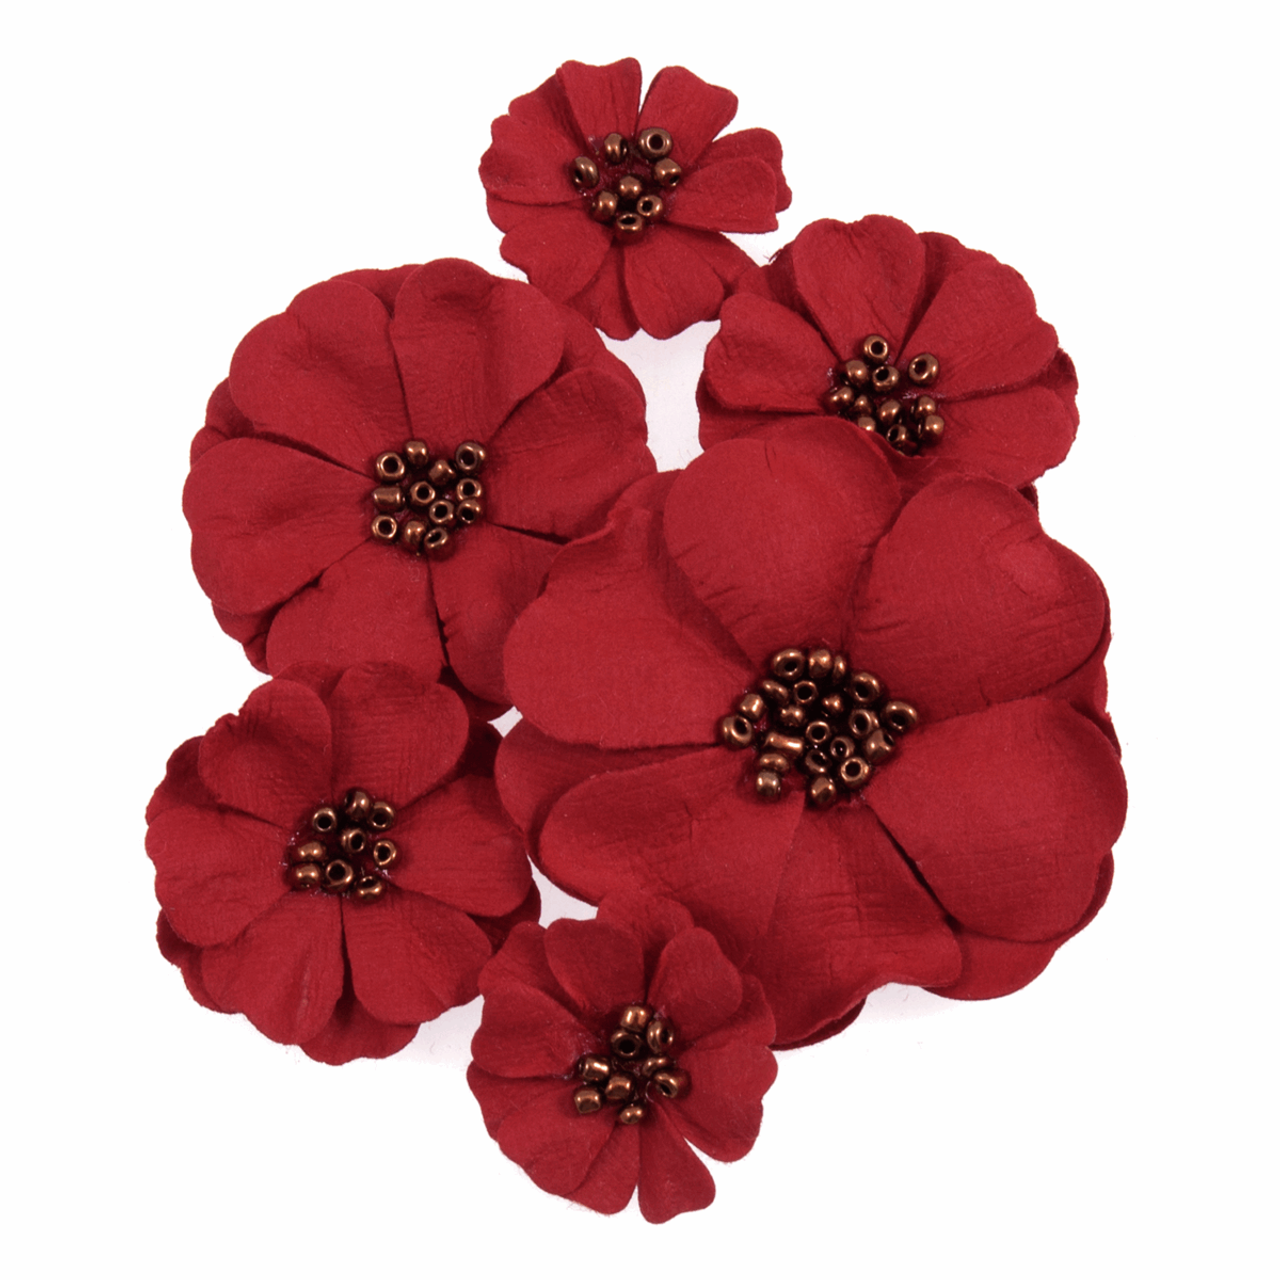 Red Poppy Paper Craft Embellishments (6pc)